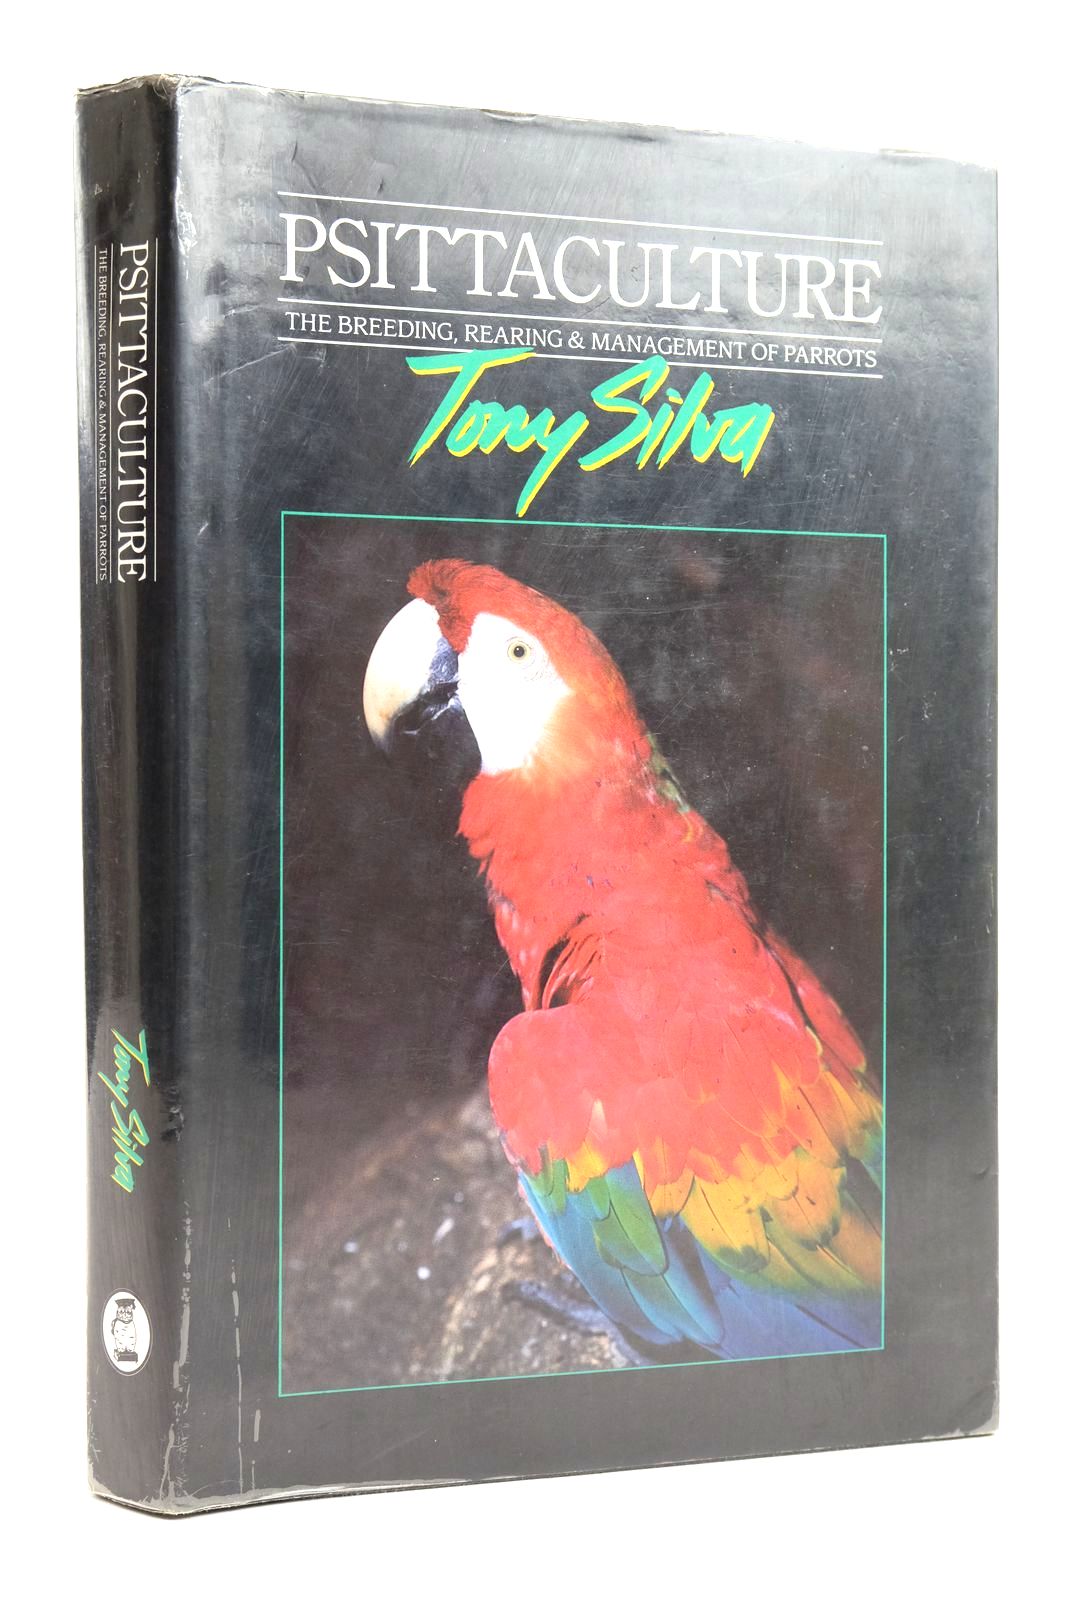 Photo of PSITTACULTURE: BREEDING, REARING AND MANAGEMENT OF PARROTS written by Silva, Tony published by Birdworld, Silvio Mattacchione &amp; Co (STOCK CODE: 2135407)  for sale by Stella & Rose's Books